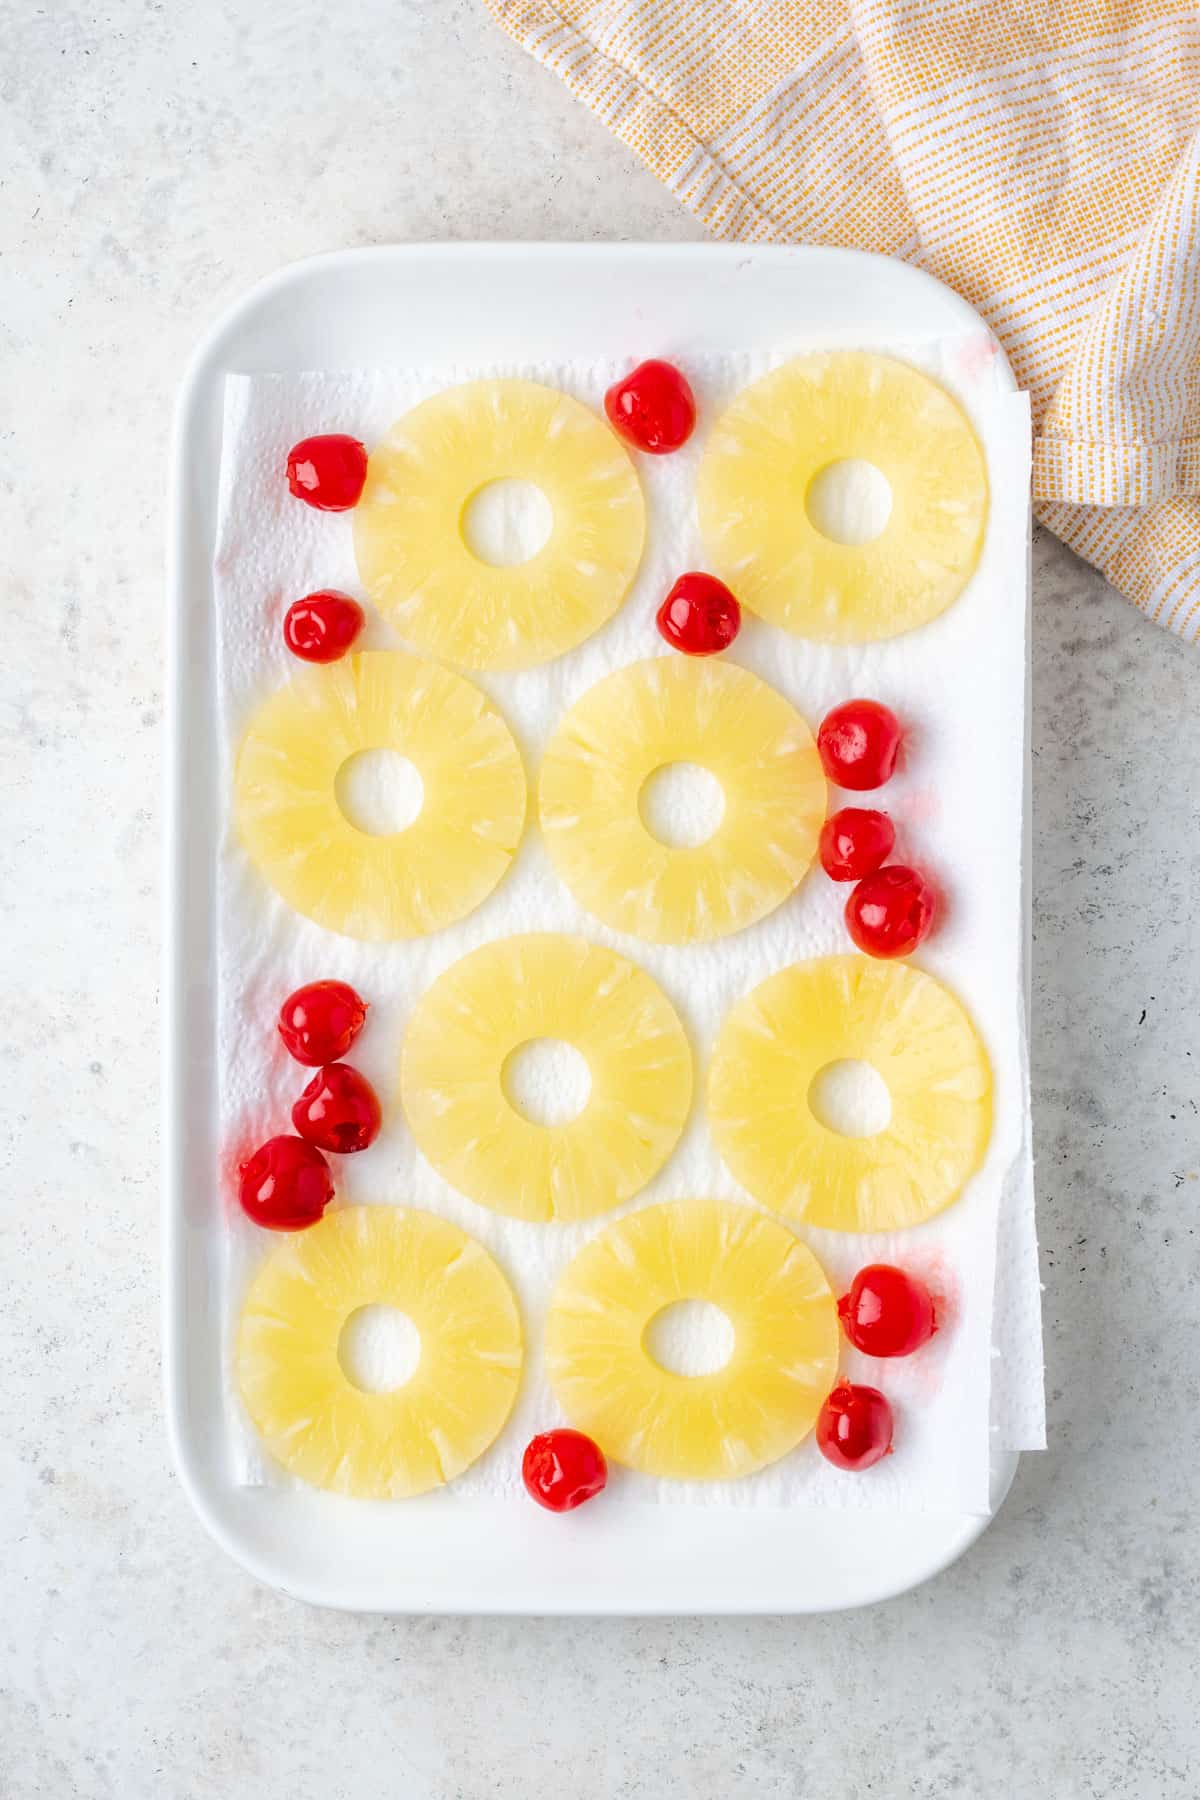 Pineapple slices and cherries spread on a platter lined with paper towels.